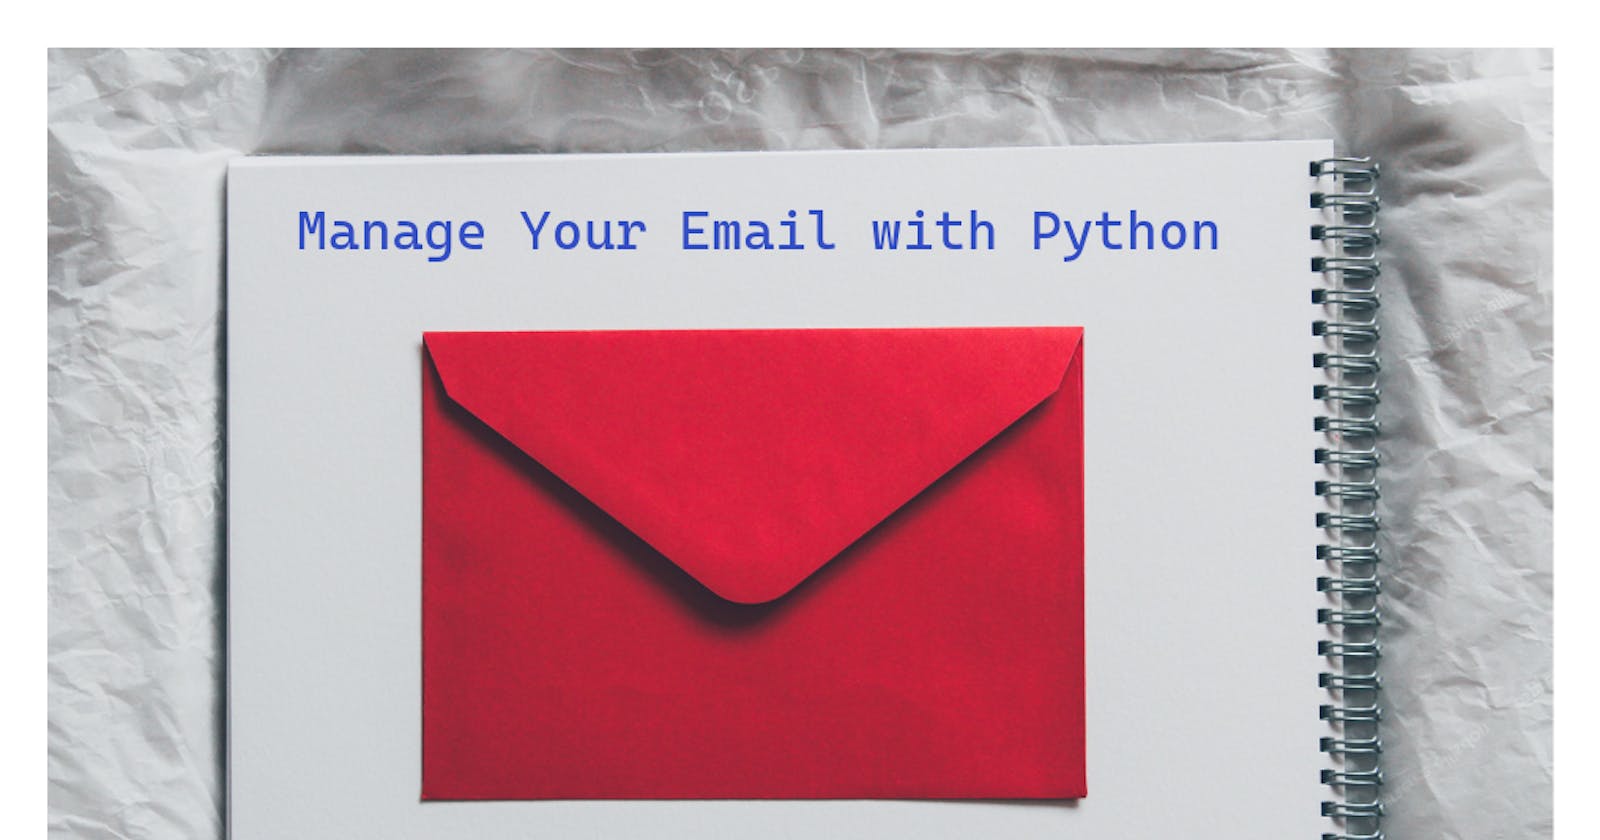 How to Access Your Email Using Python